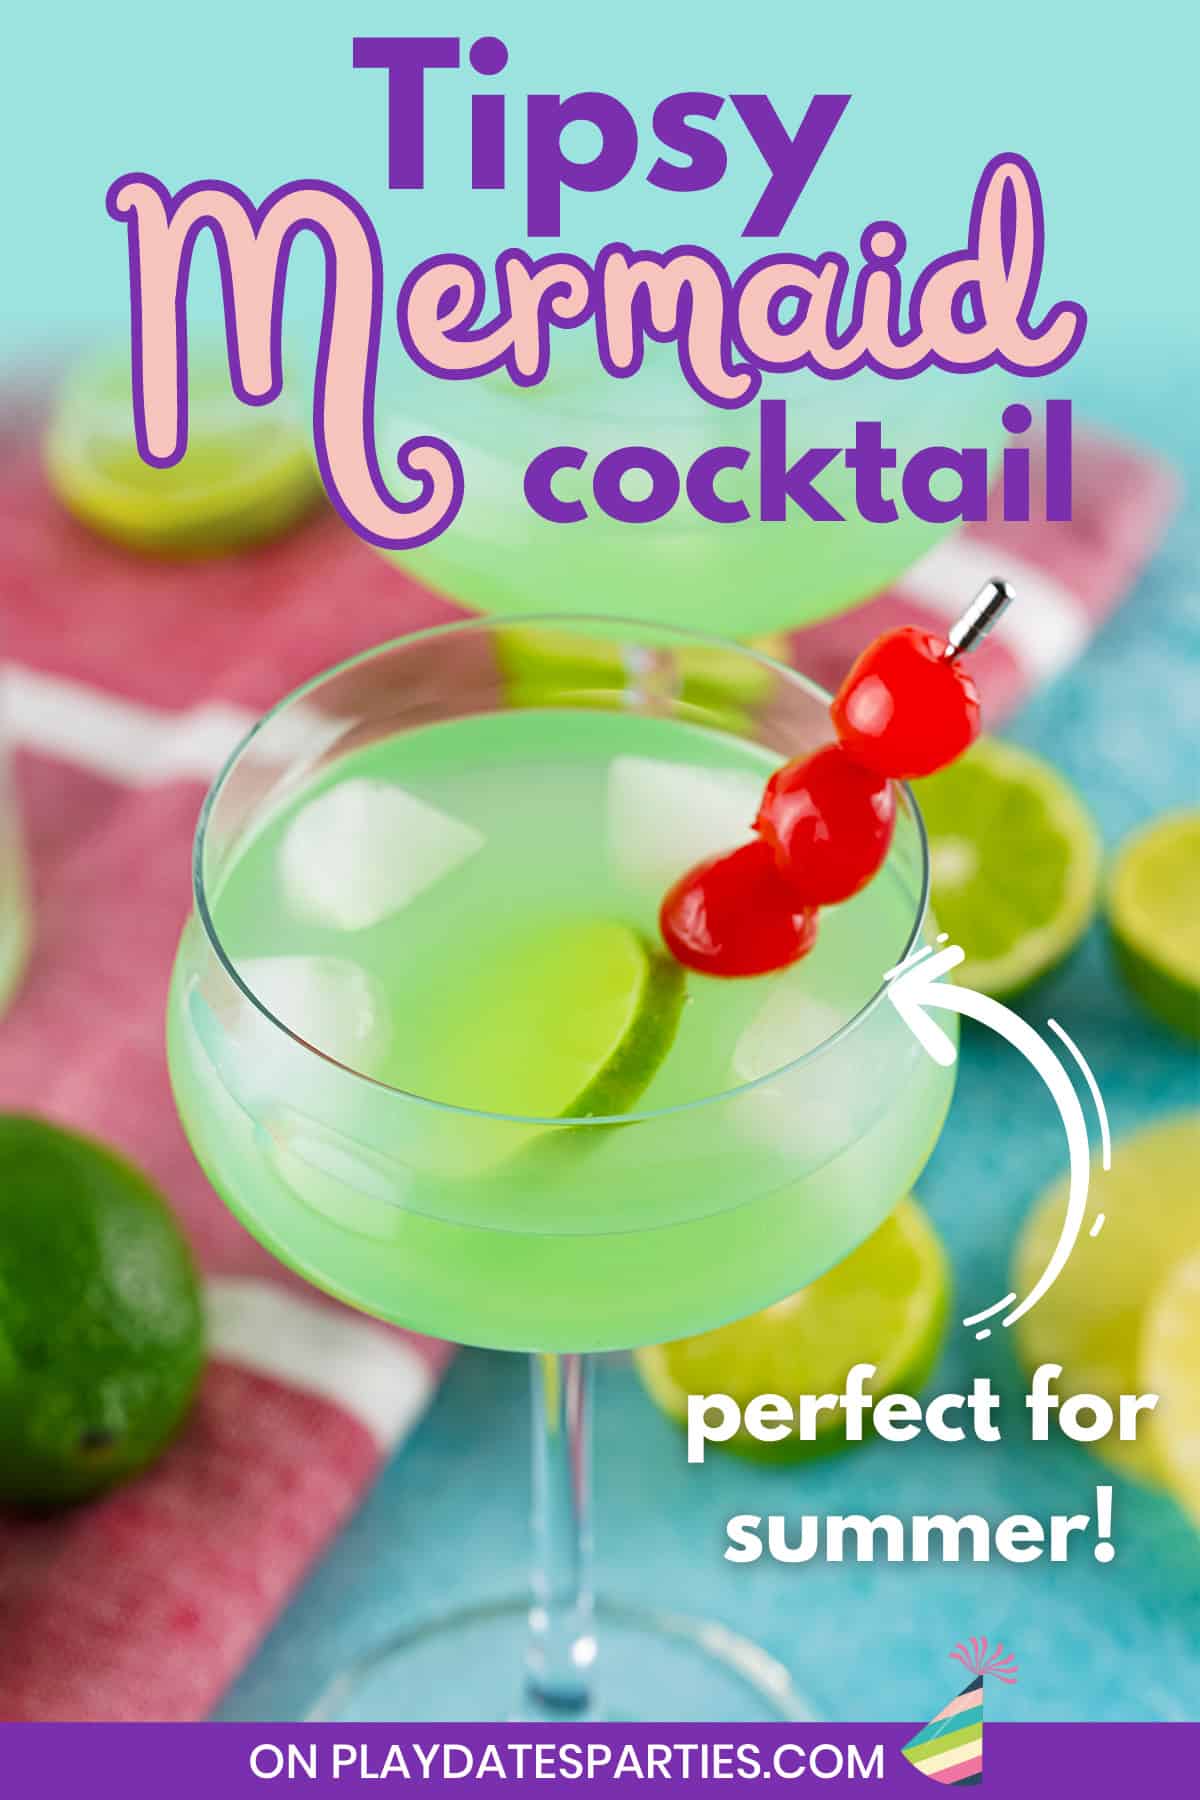 A green cocktail on a blue surface with text overlay Tipsy Mermaid cocktail perfect for summer.